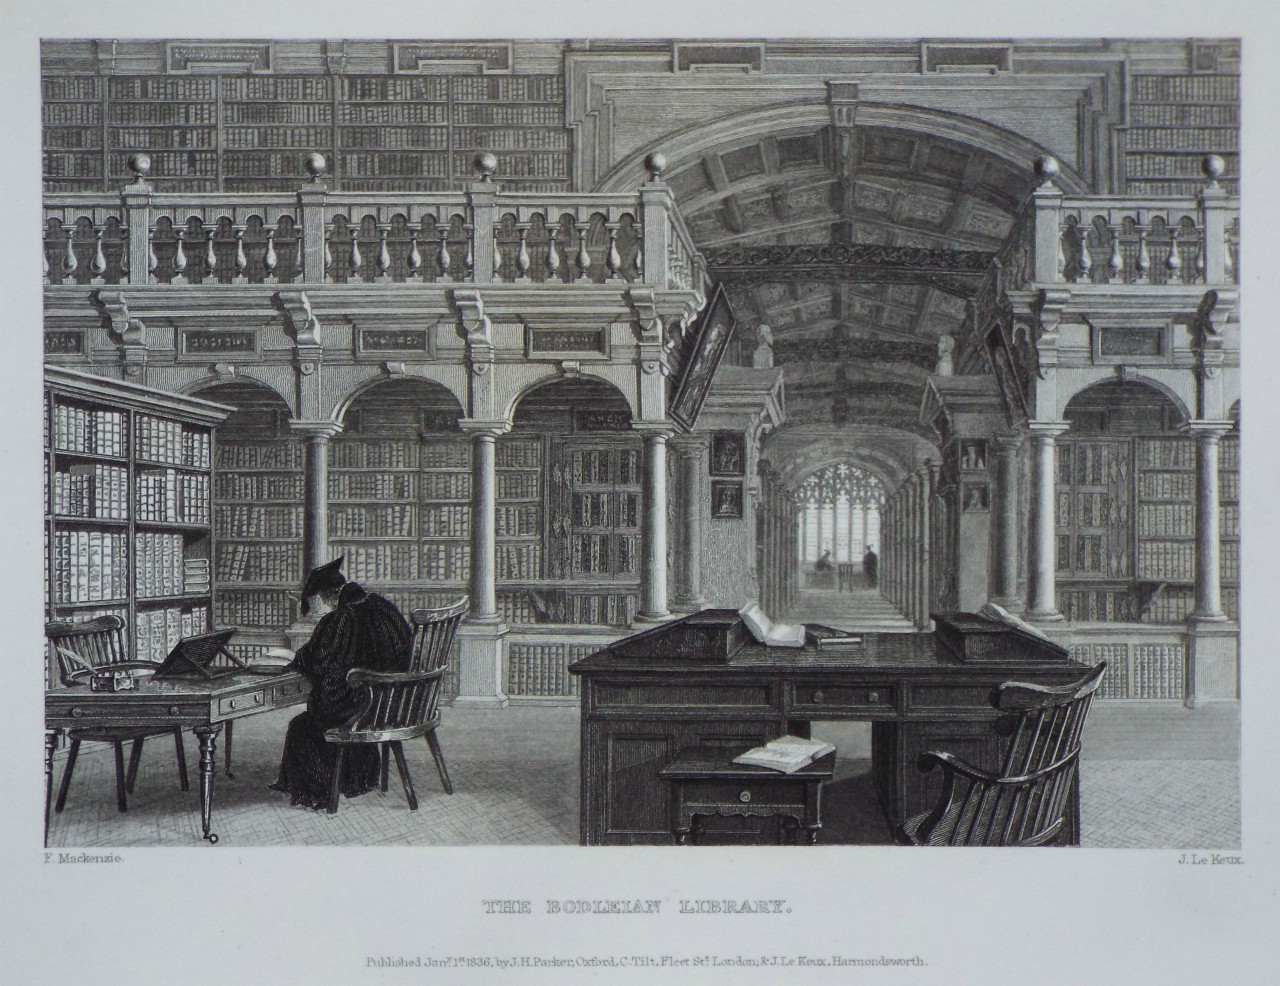 Print - The Bodleian Library. - Le